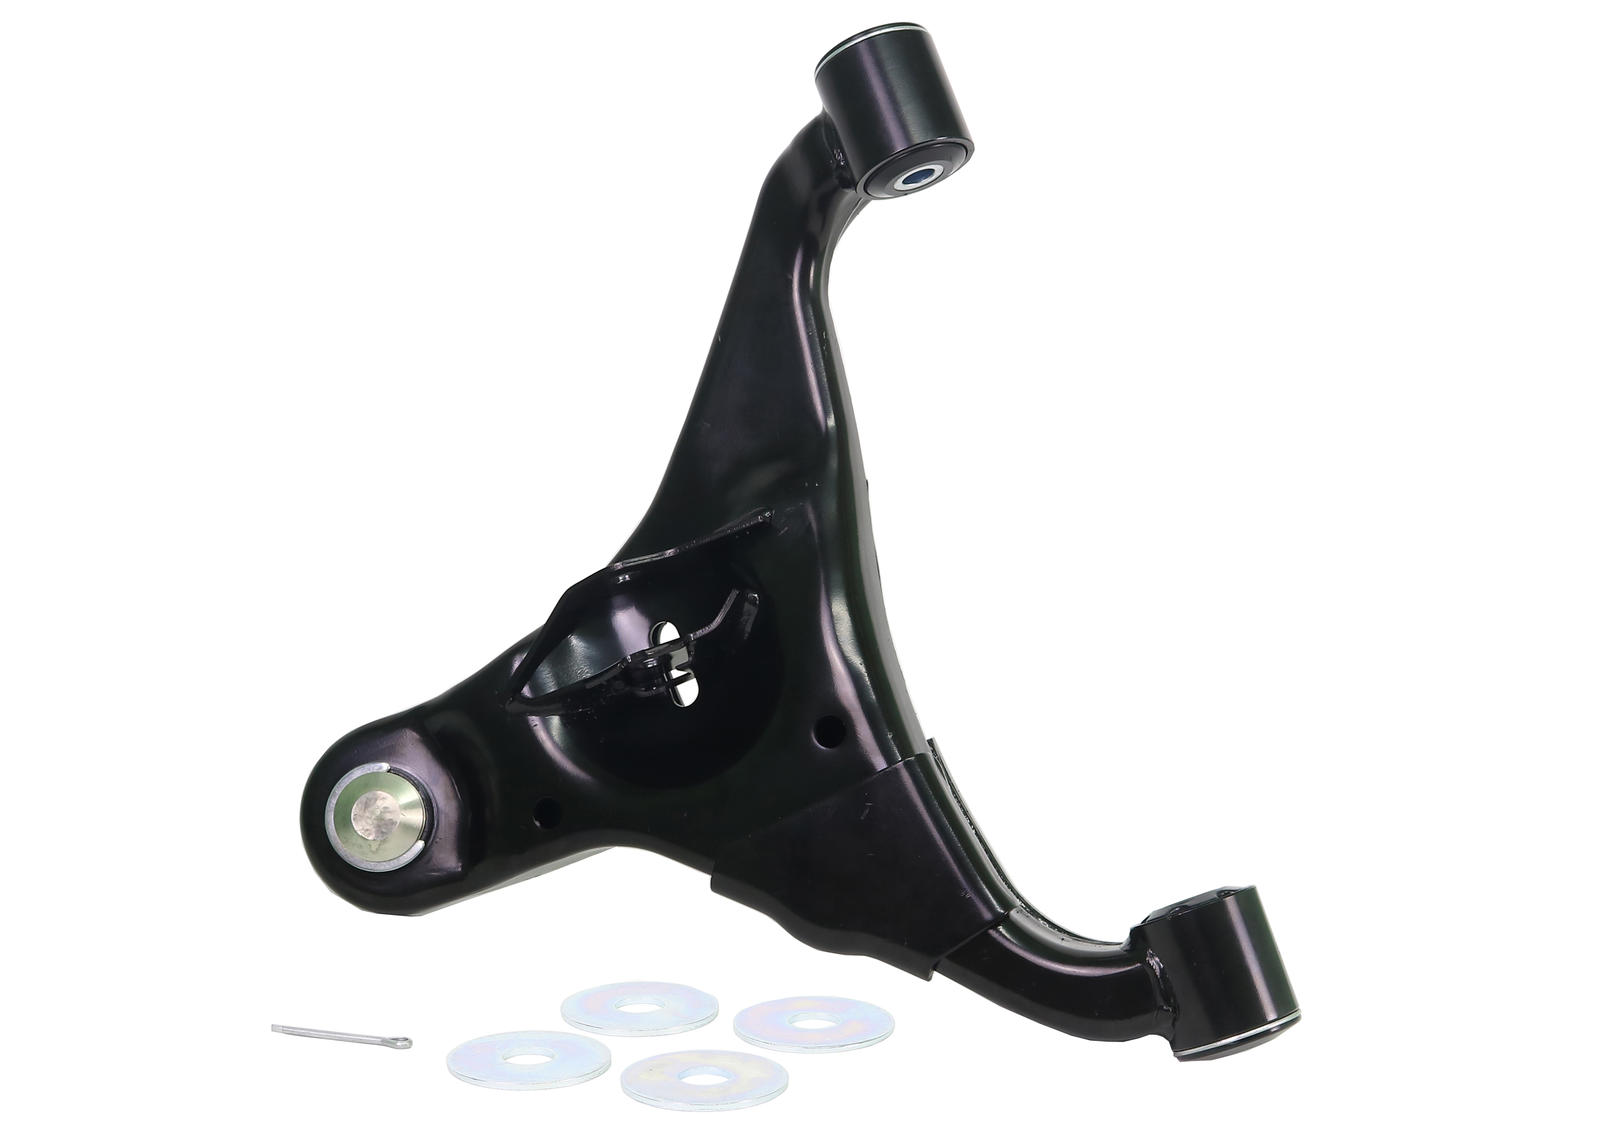 Front Control Arm Lower - Arm Left to Suit Ford Ranger PXI, II and Mazda BT-50 UP, UR 2wd/4wd